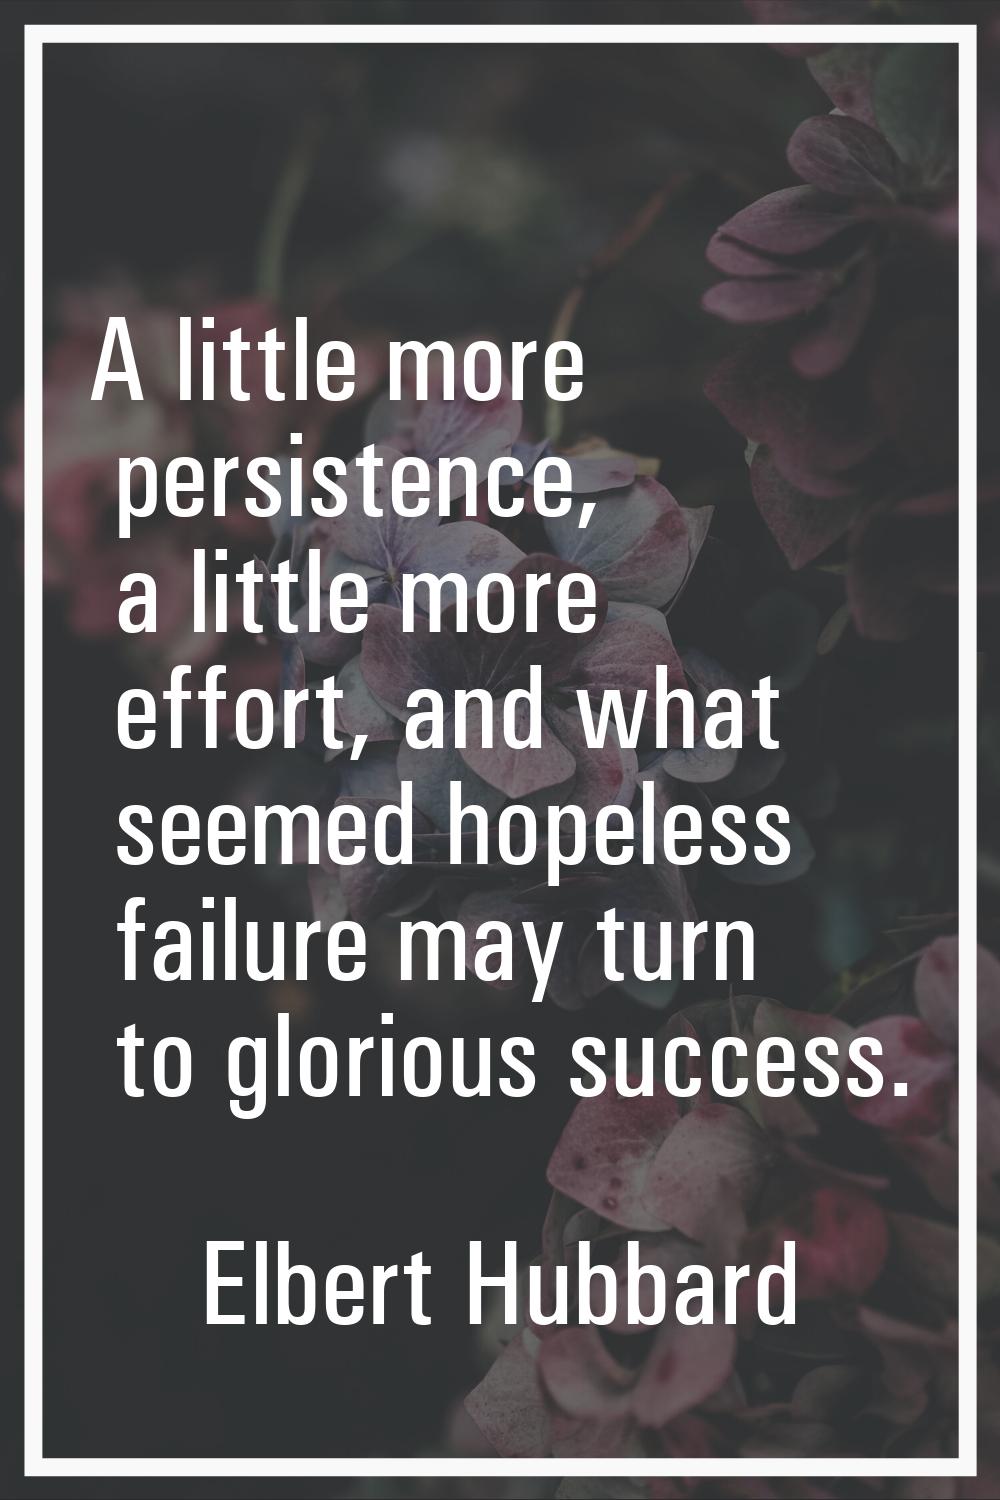 A little more persistence, a little more effort, and what seemed hopeless failure may turn to glori